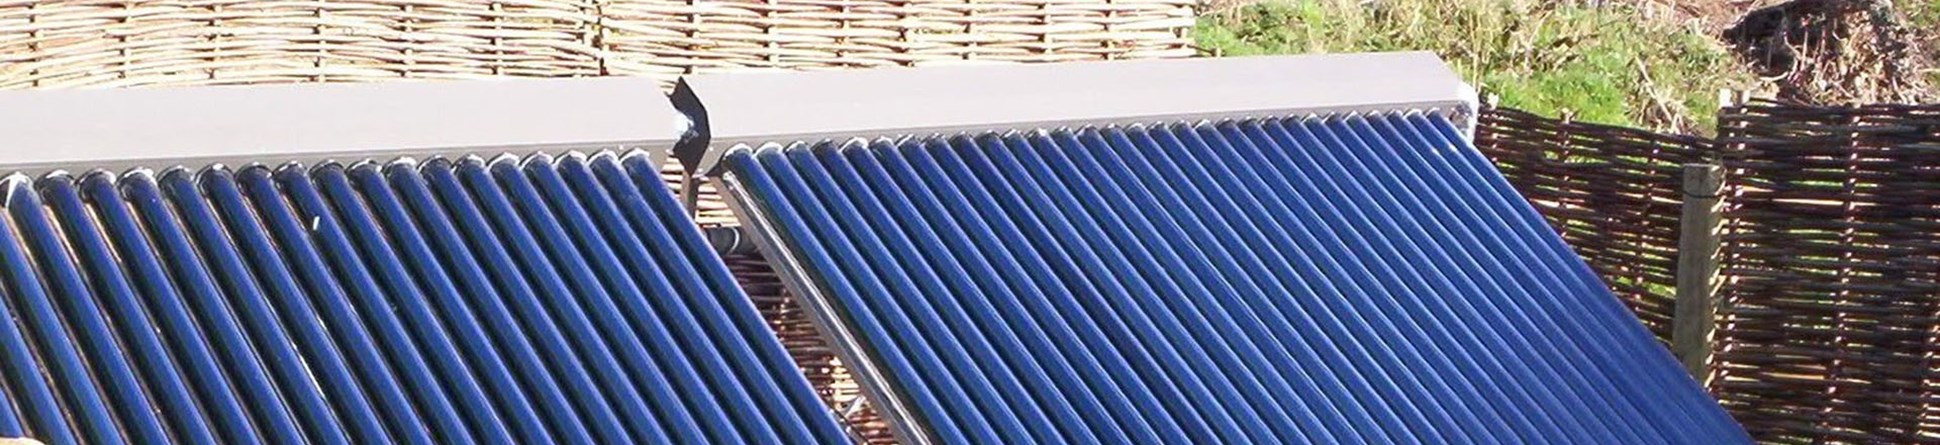 Solar thermal panel located at ground level